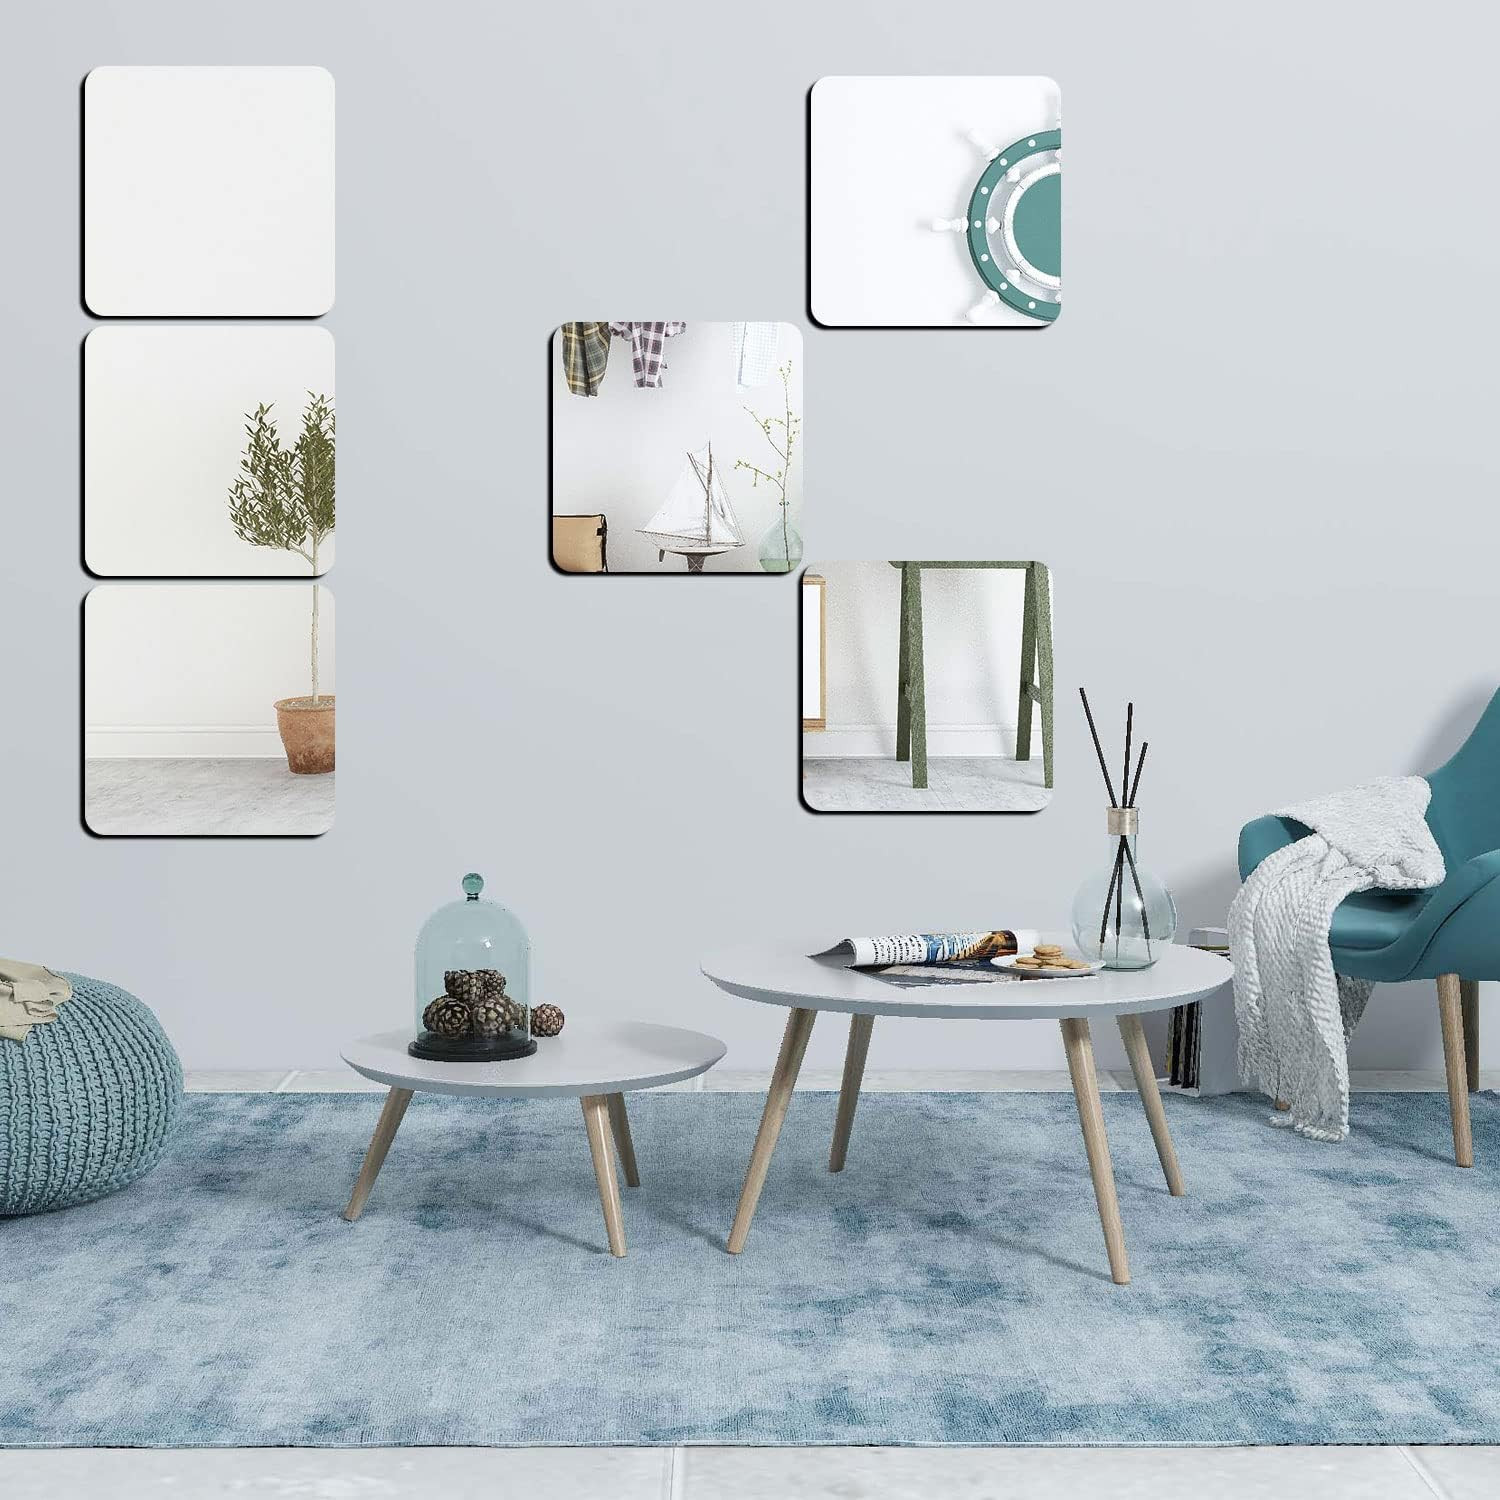 Kuber Industries Self Adhesive Mirror Stickers For Wall|Square Wall Mirror Stickers|Flexible Mirror For Wall Décor, Living Room|Premium Acrylic Material 